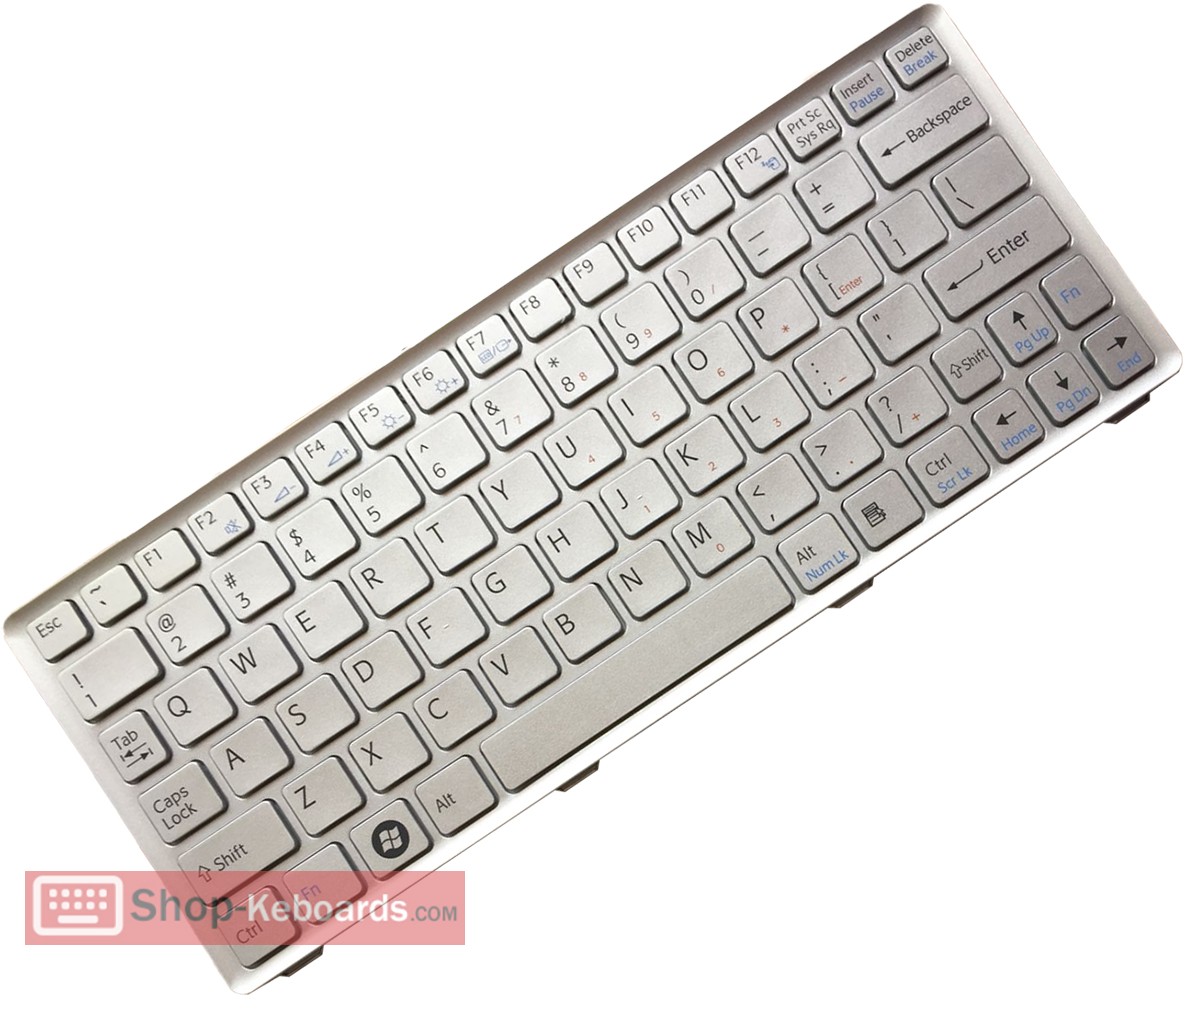 Sony Vaio VPC-W222AX Keyboard replacement